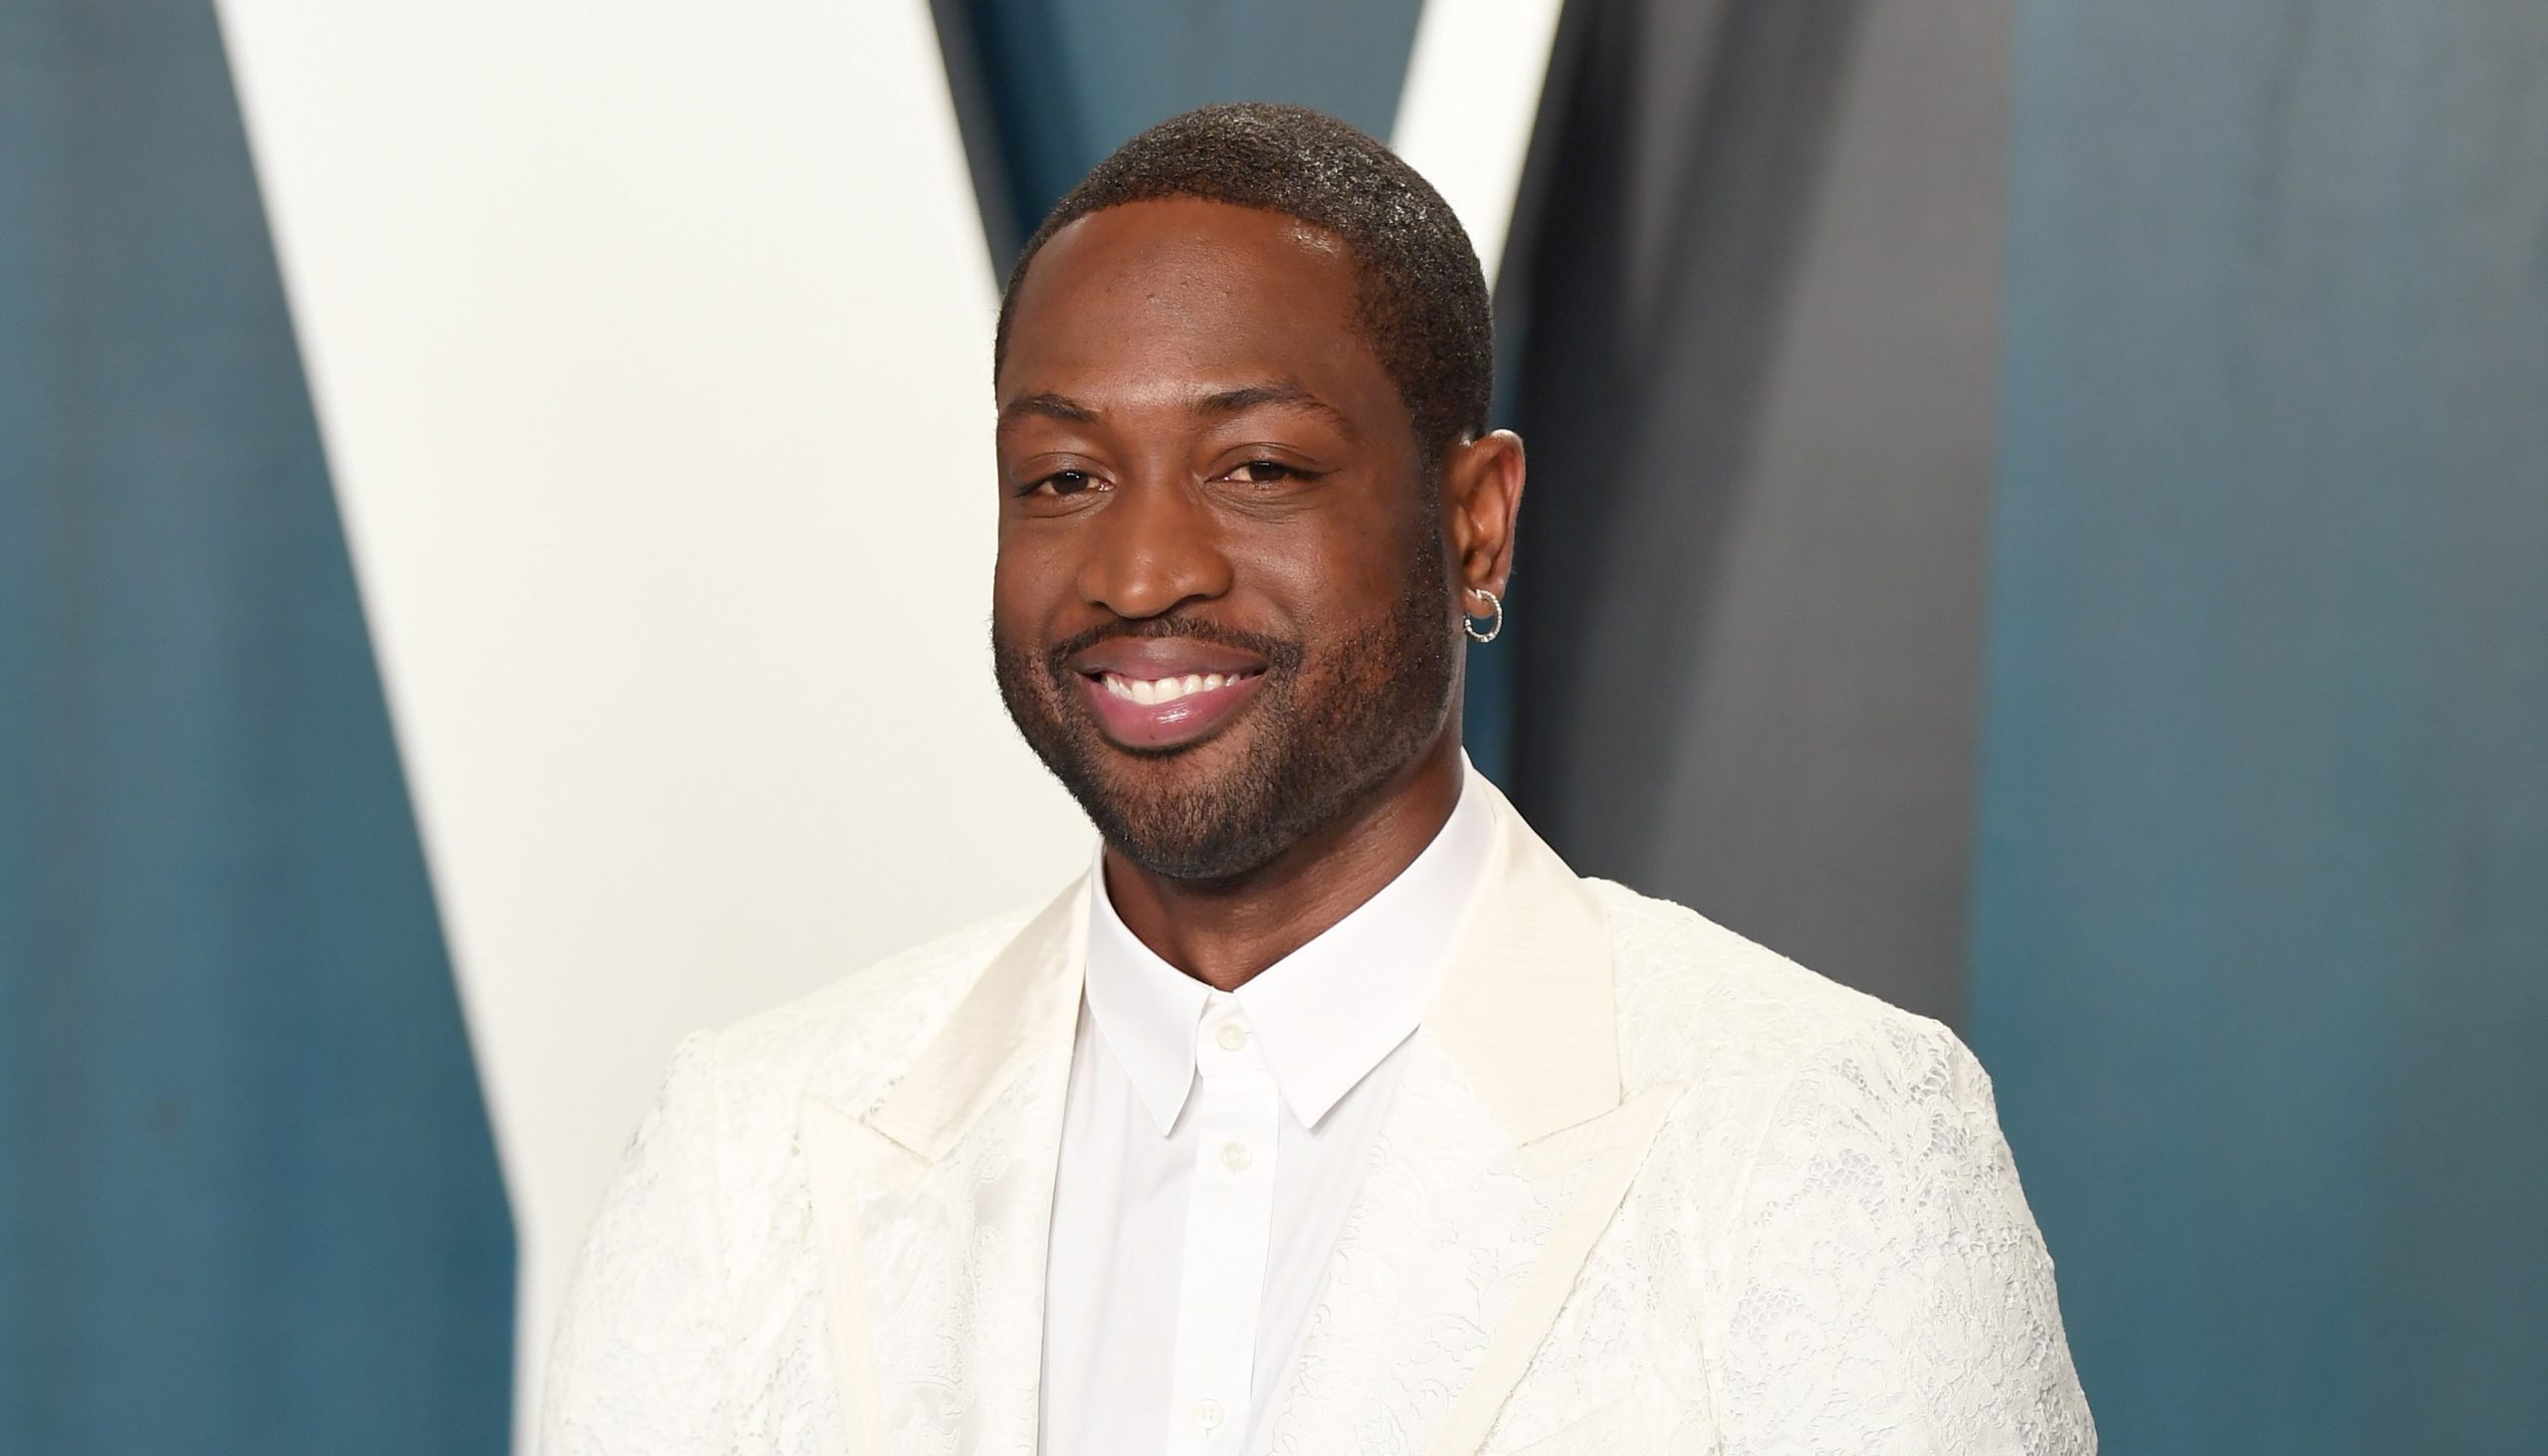 Dwyane Wade Dyed a Black Power Fist Into His Hair — See Photo